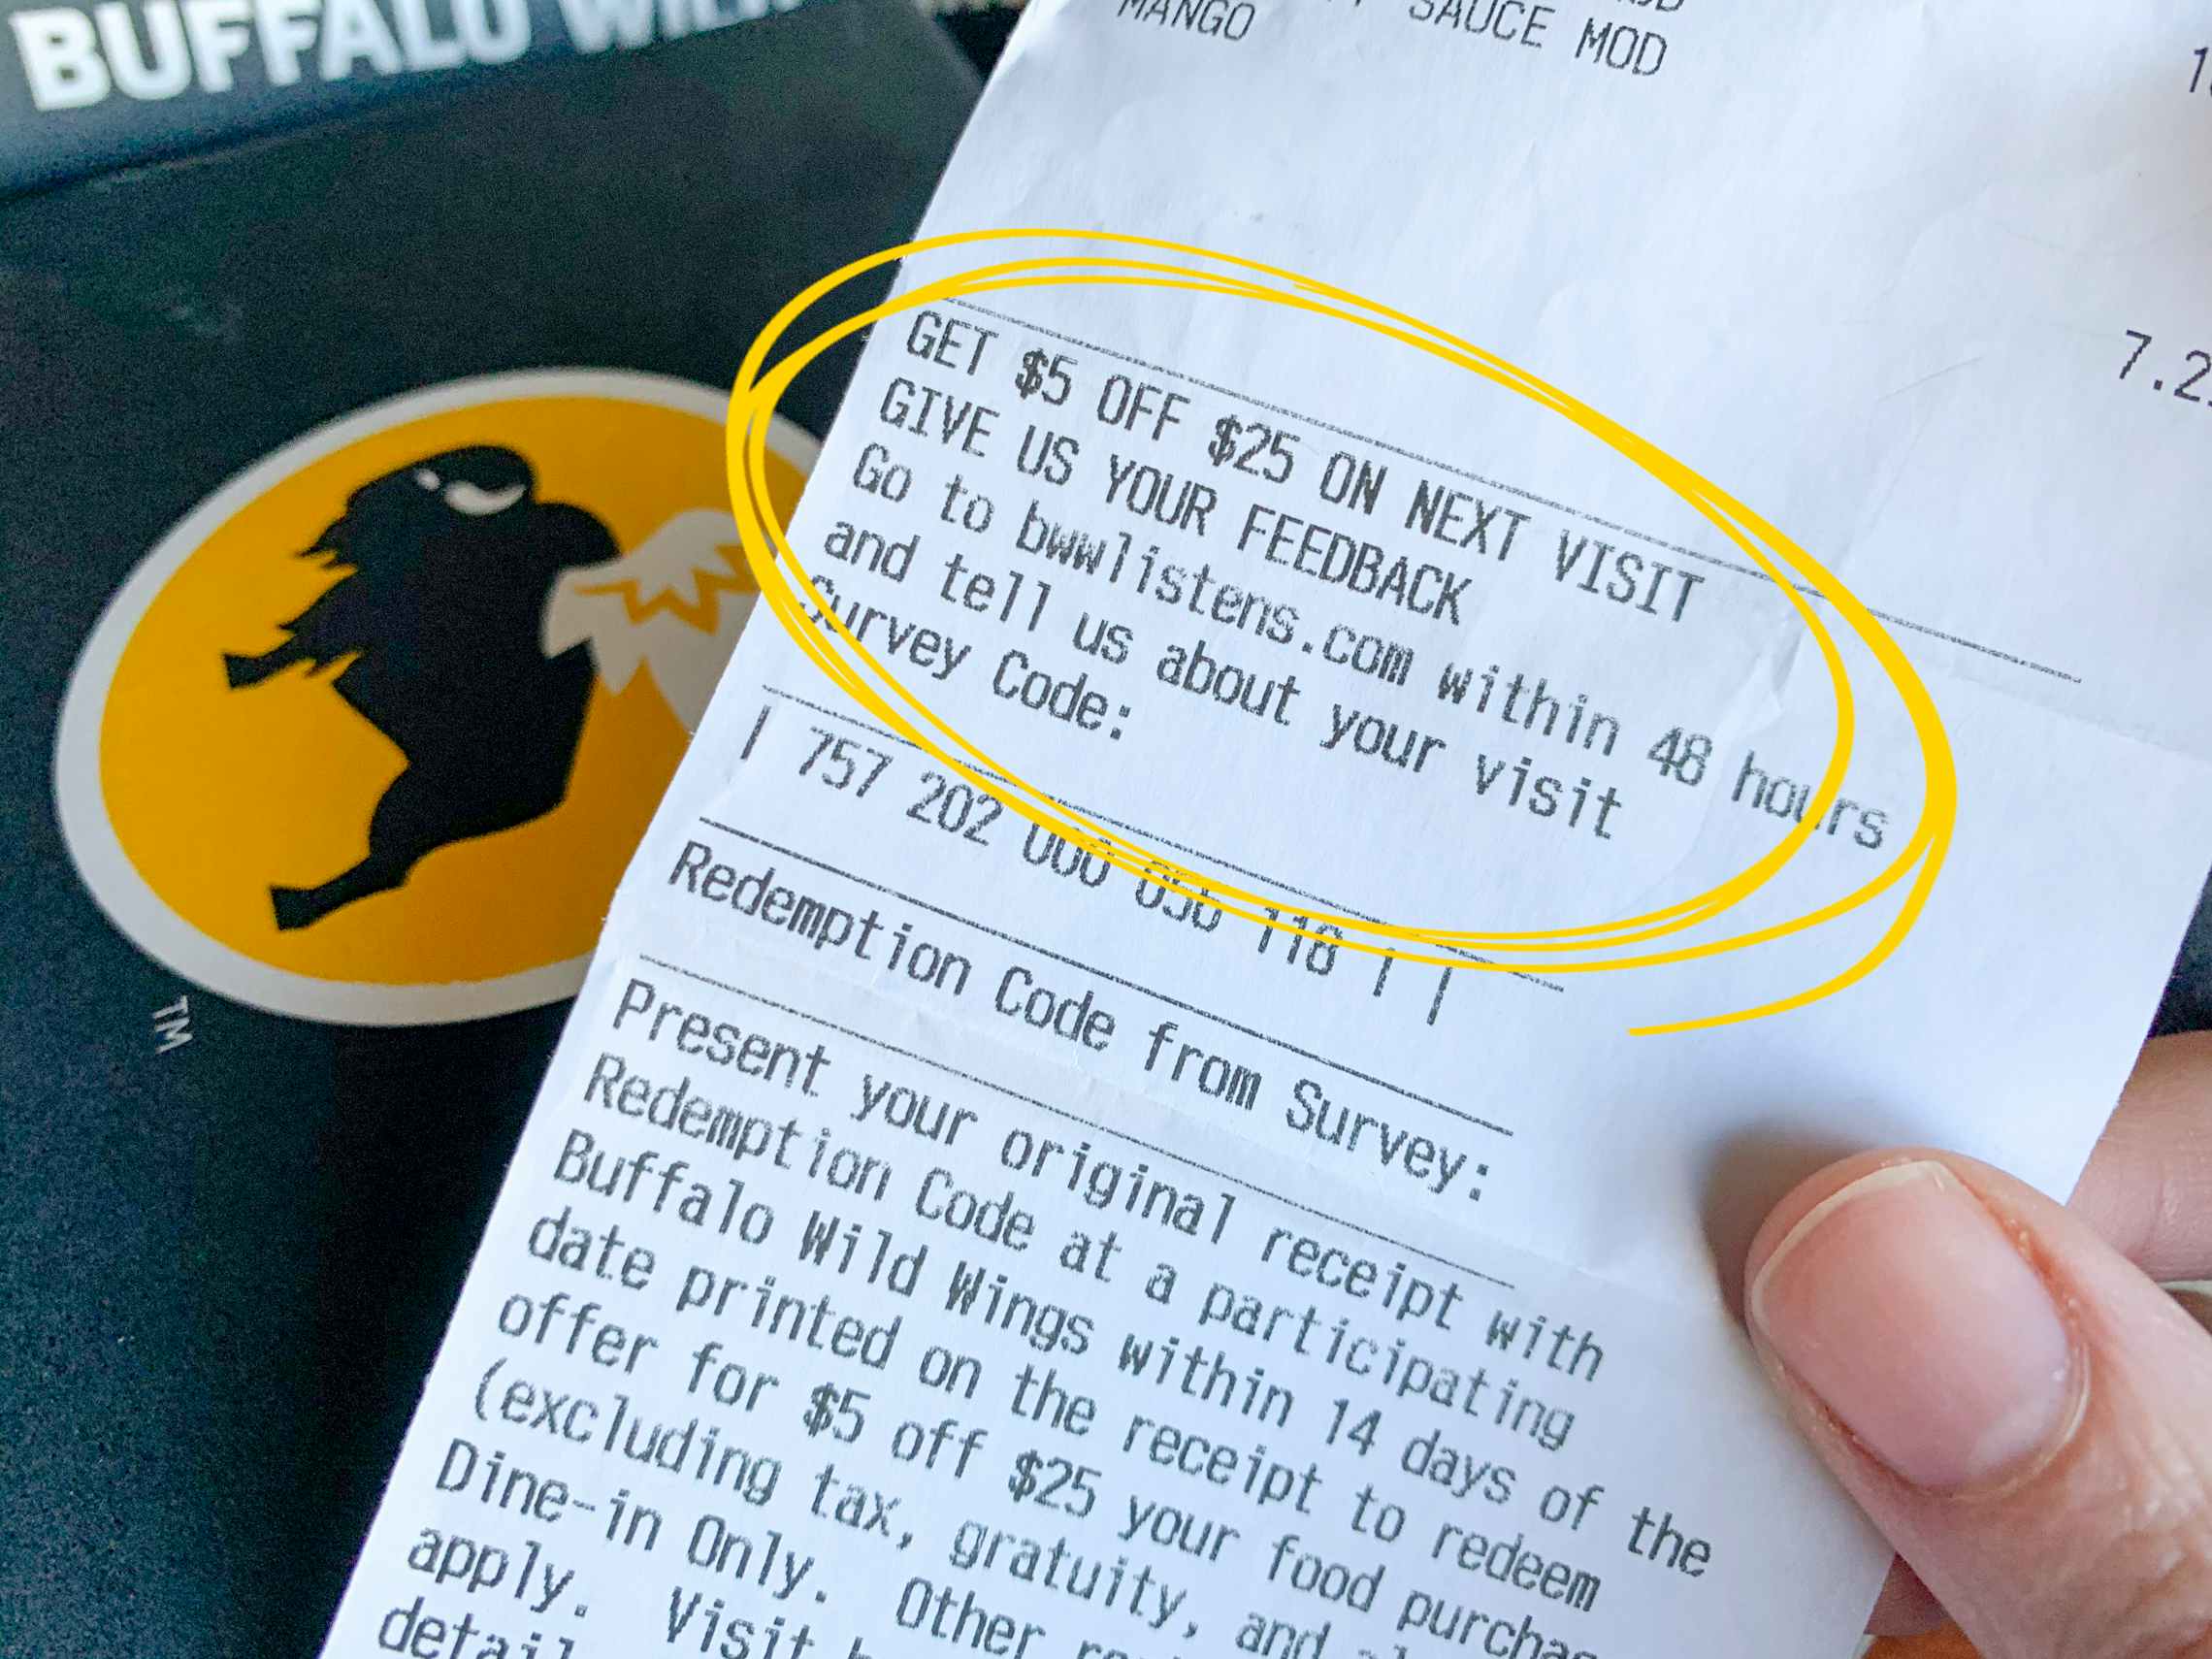 A receipt with a yellow circle around information about a survey to receive $5 off $25 during your next visit.